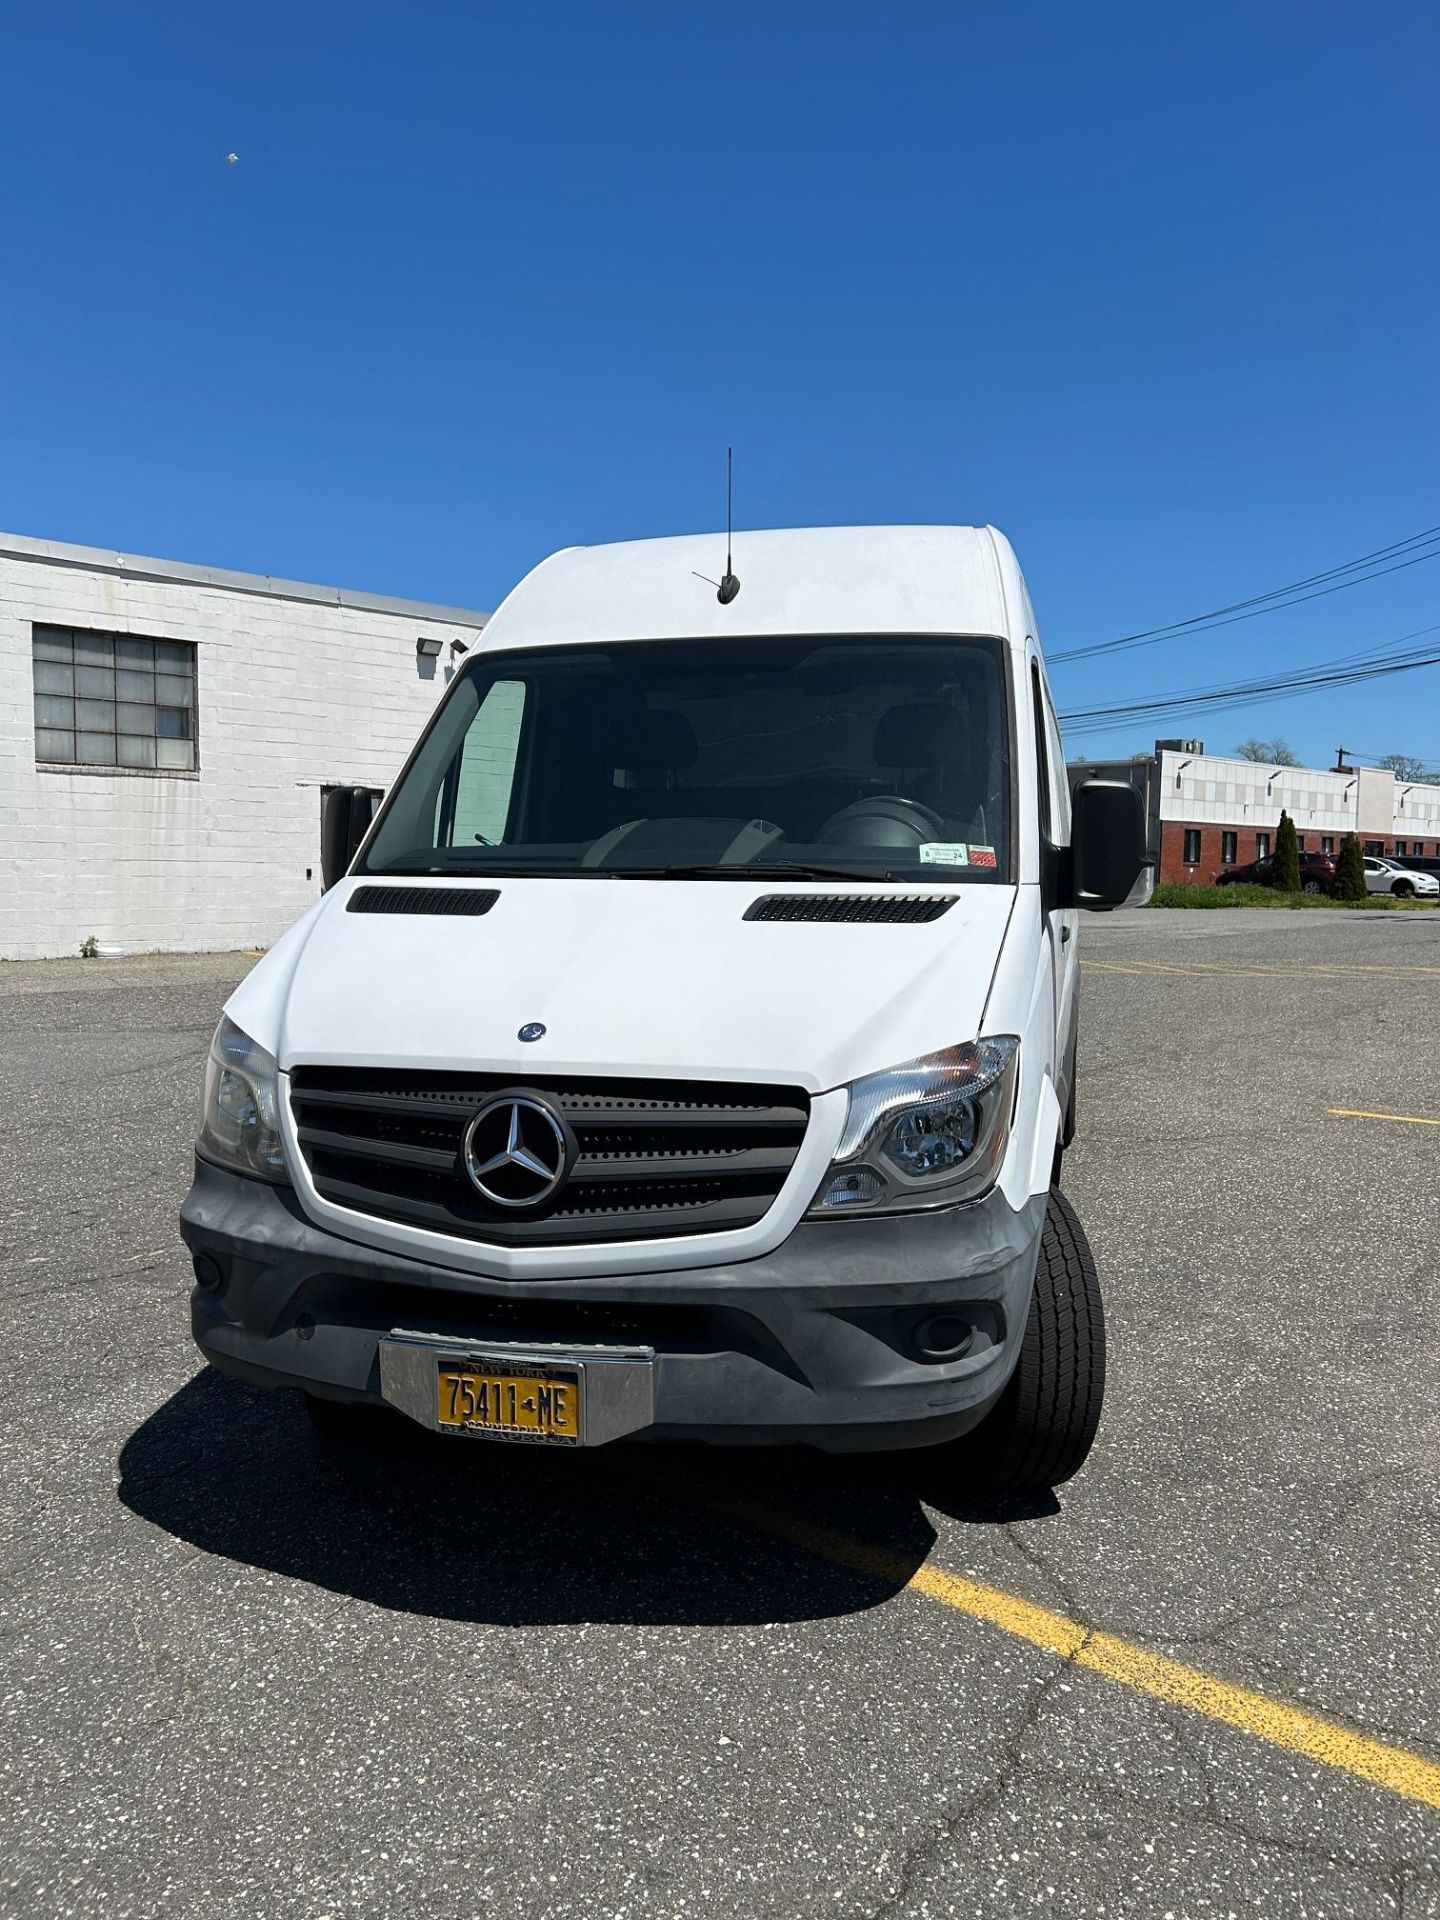 2014 Mercedes Diesel Cargo Van, Automatic Transmission, Approx. 48899 Miles. - Image 7 of 9